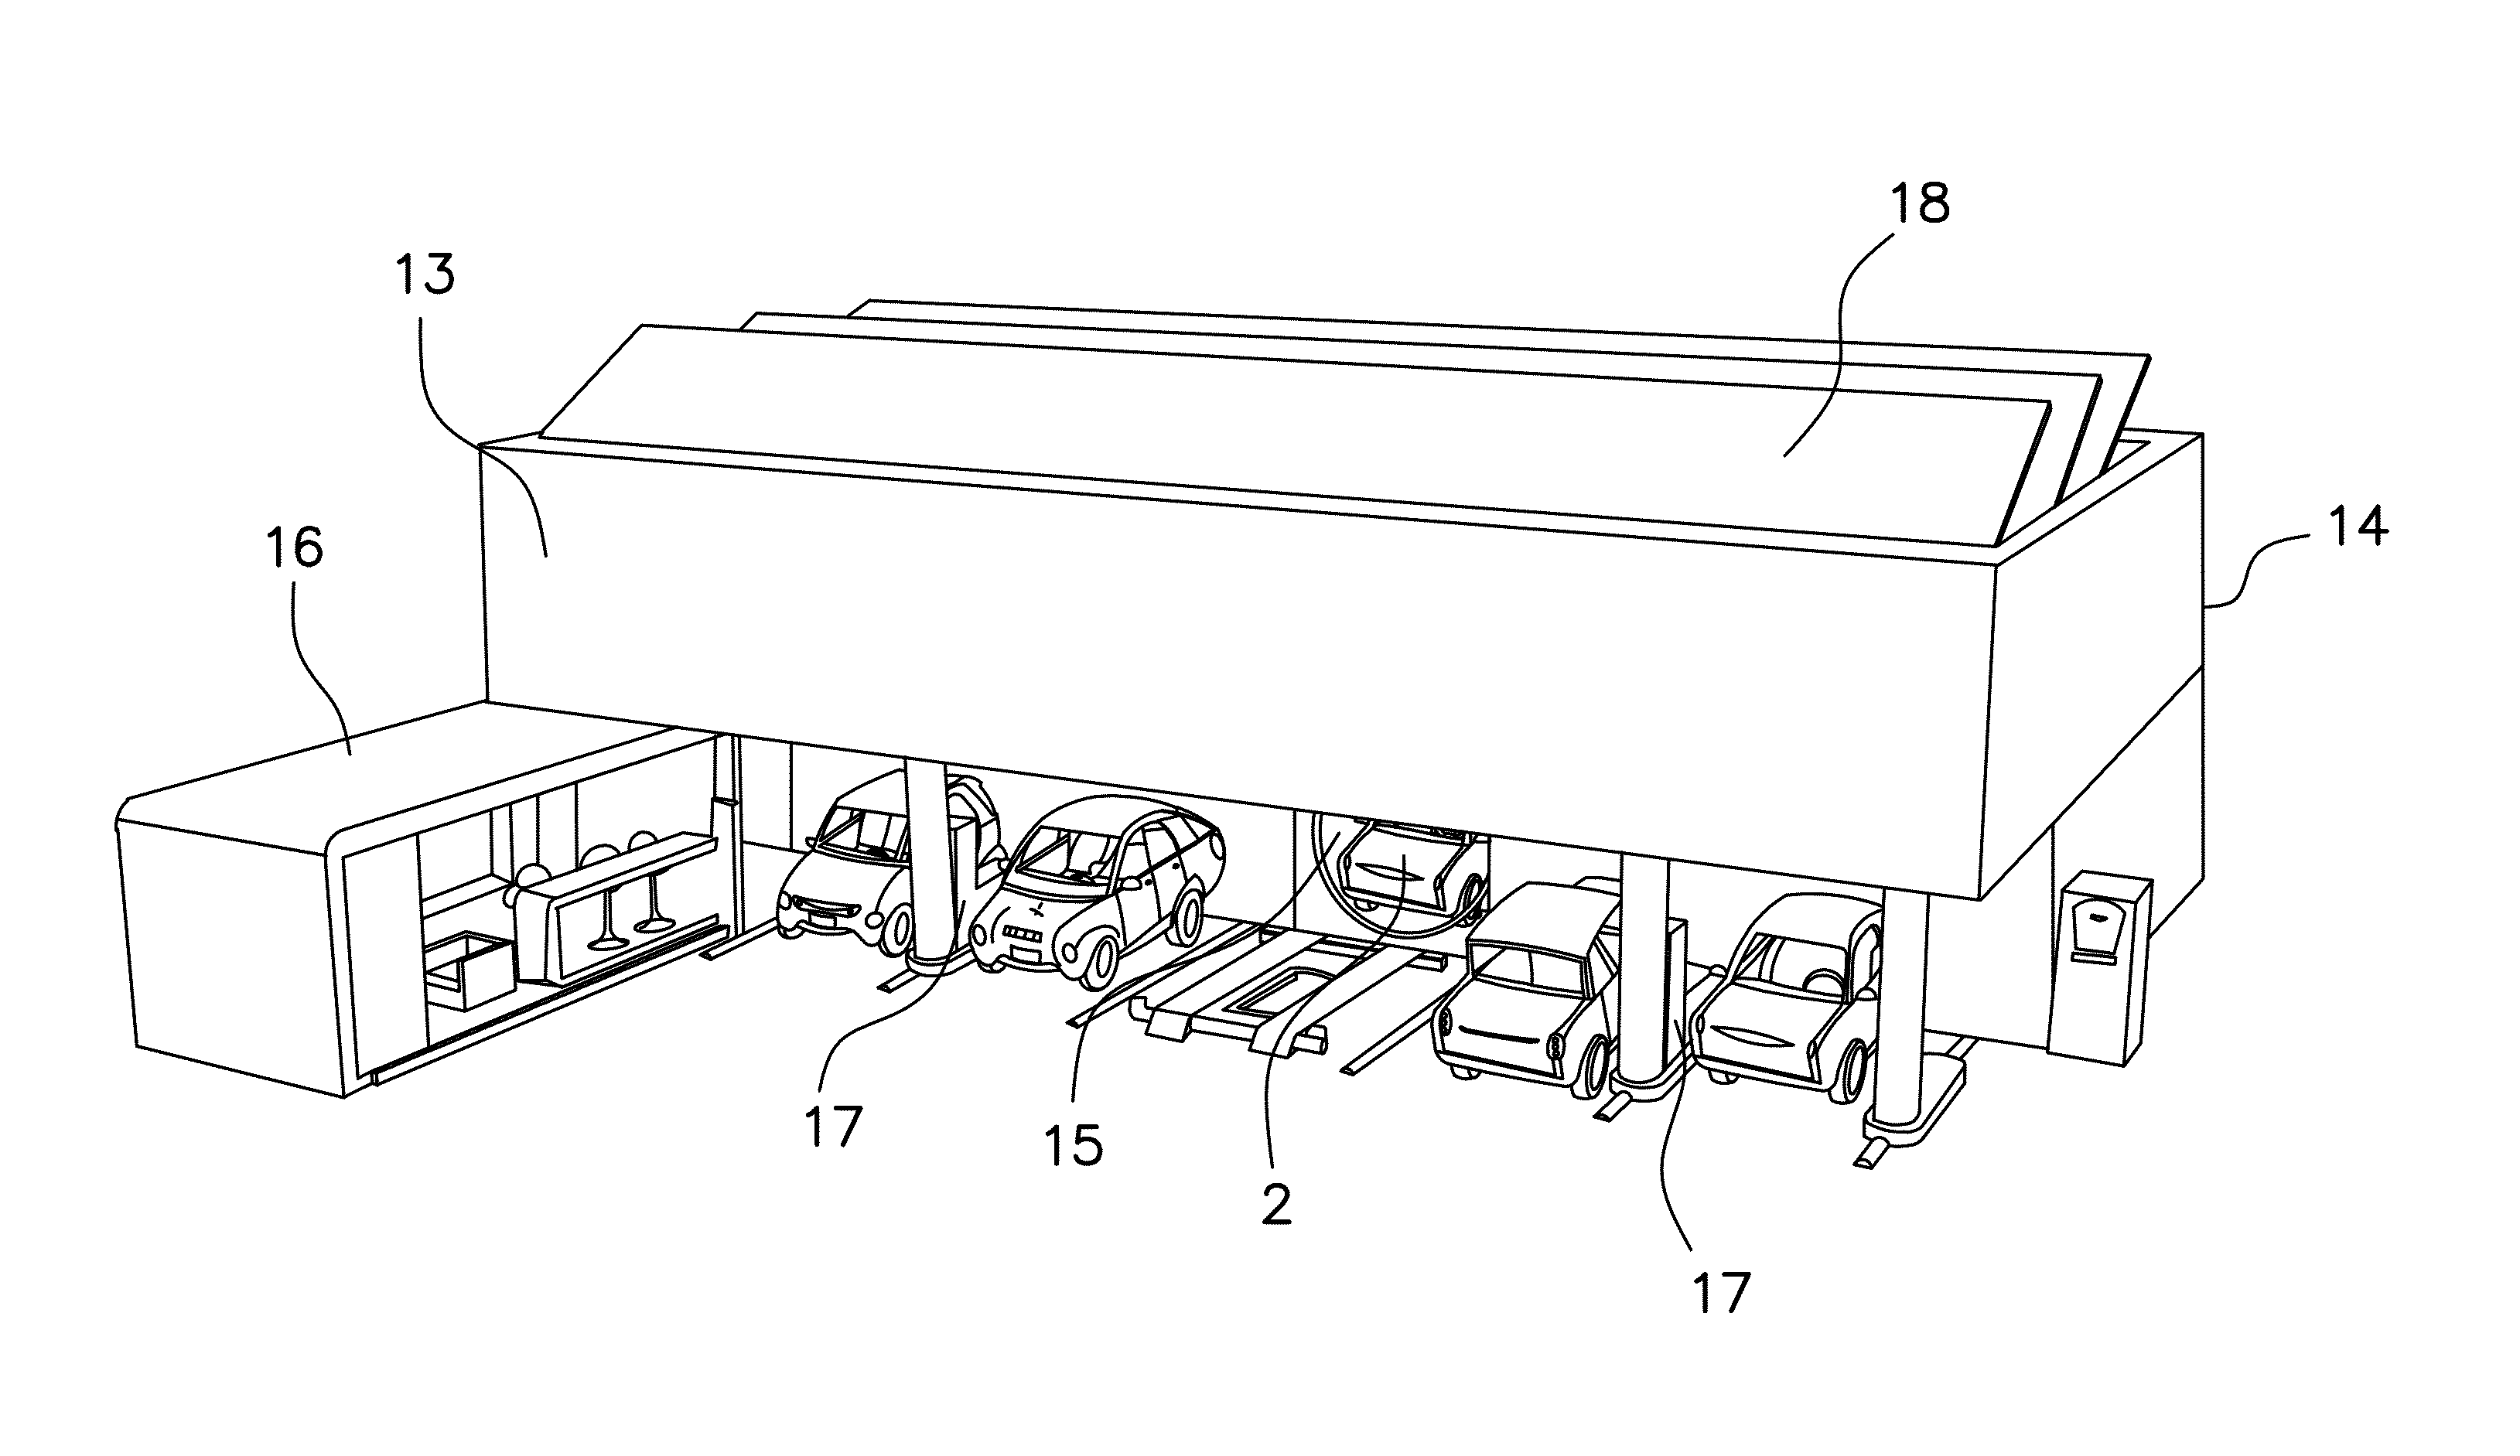 Facility for parking and recharging electrical vehicles